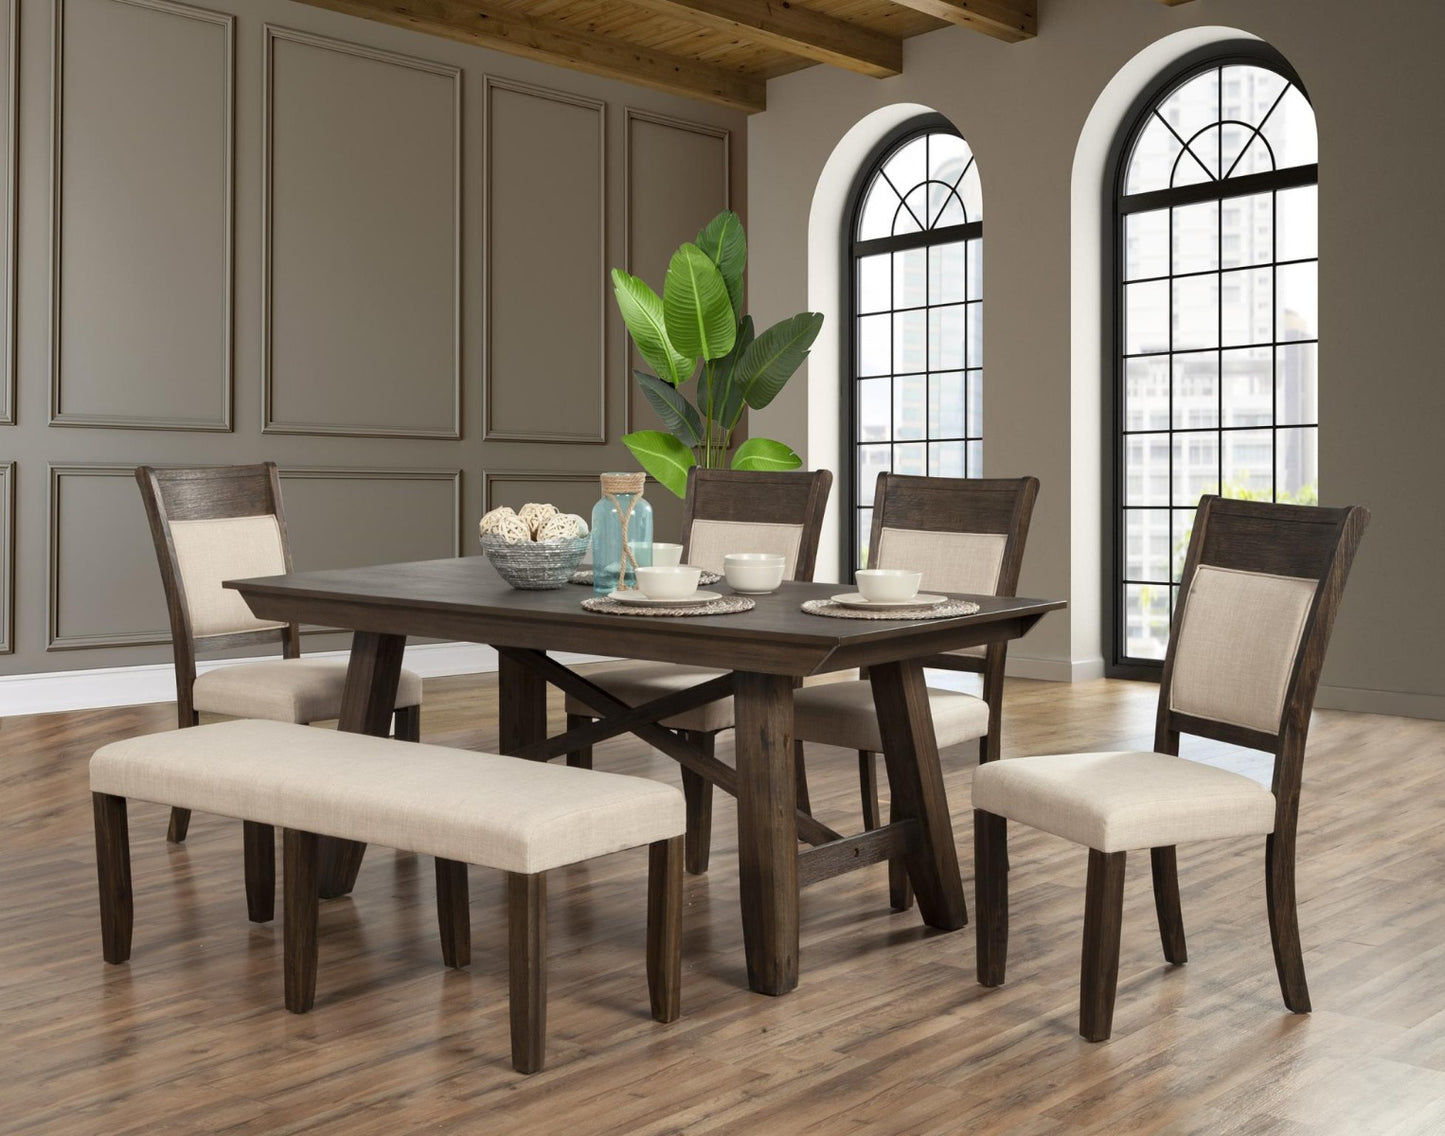 Brayden 6 Pc Dining Collection by Alpine Furniture - Acacia Solids